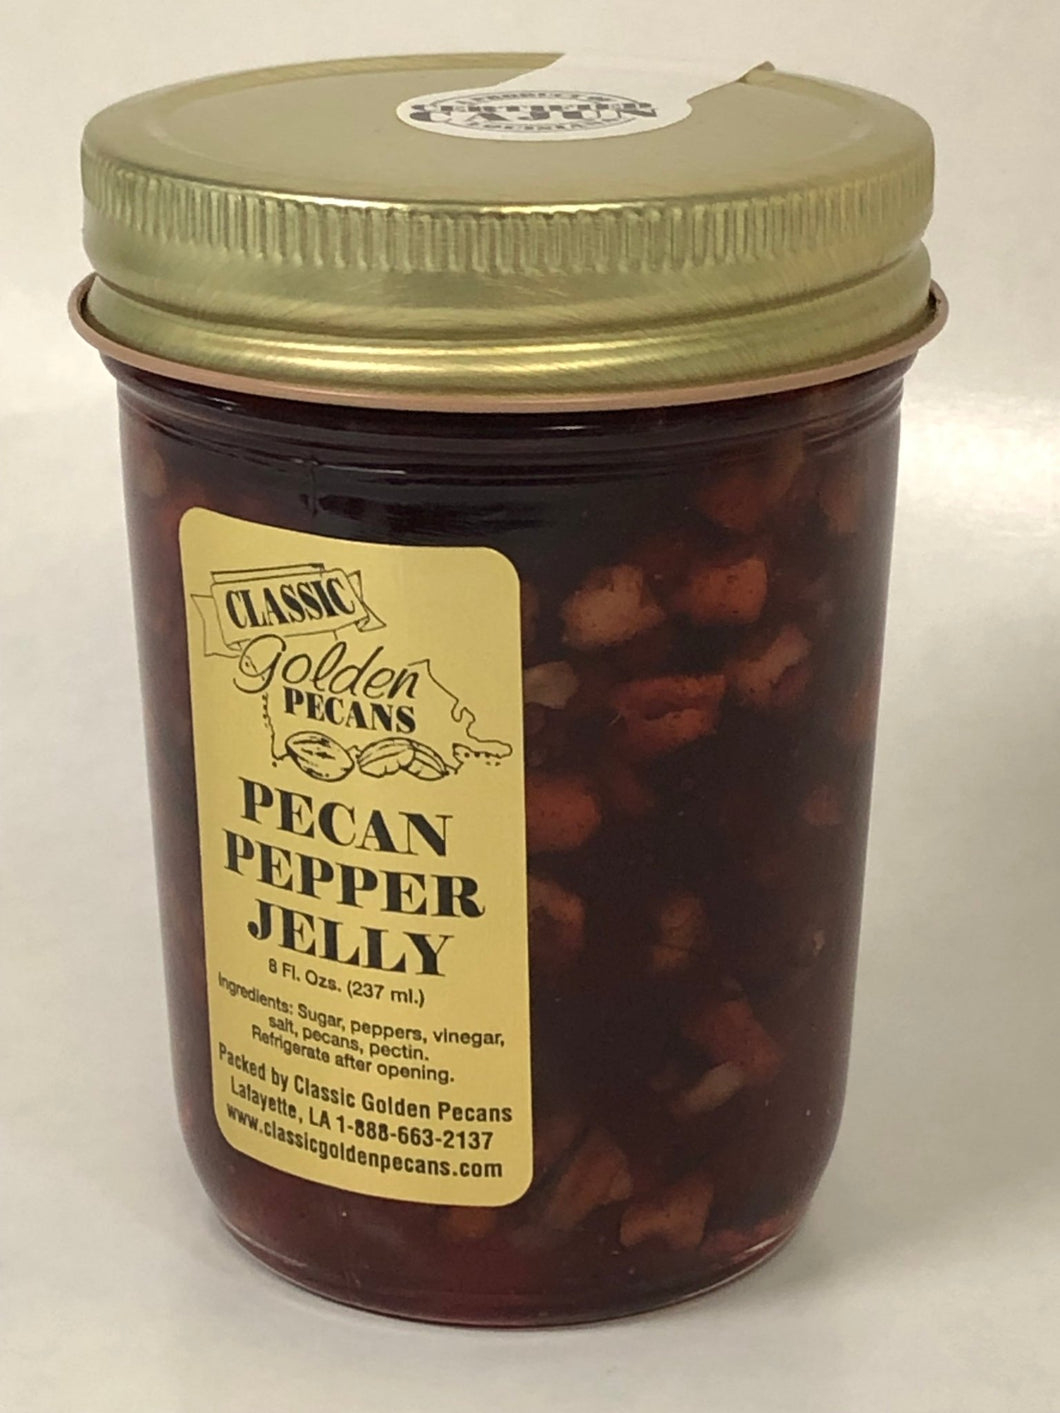 Classic Golden Pecans - Pecan Pepper Jelly by Classic Golden Pecans - | Delivery near me in ... Farm2Me #url#